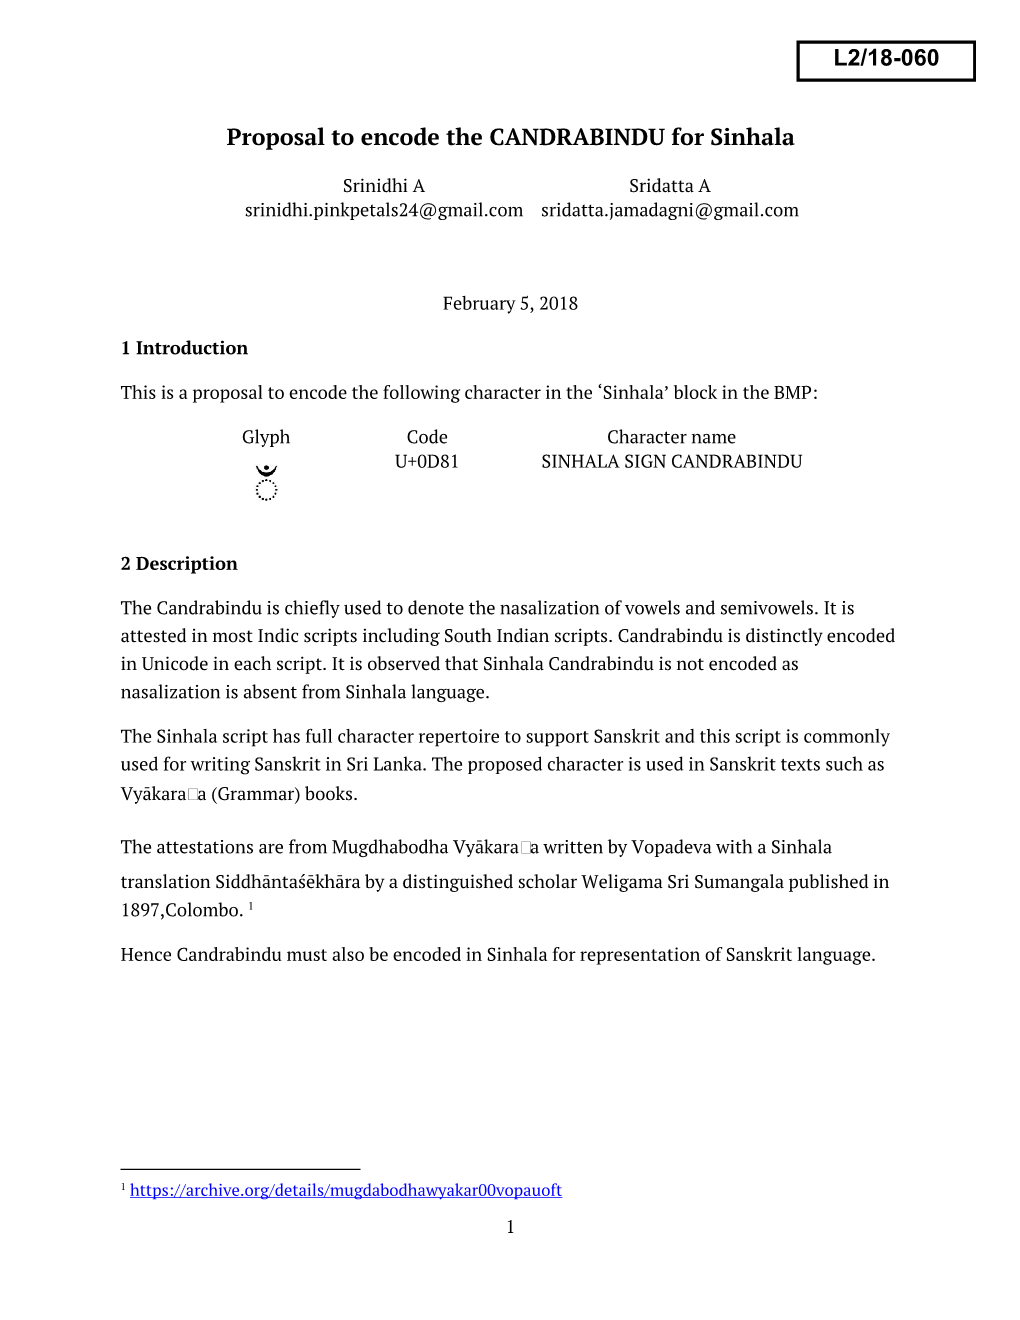 Proposal to Encode the CANDRABINDU for Sinhala L2/18